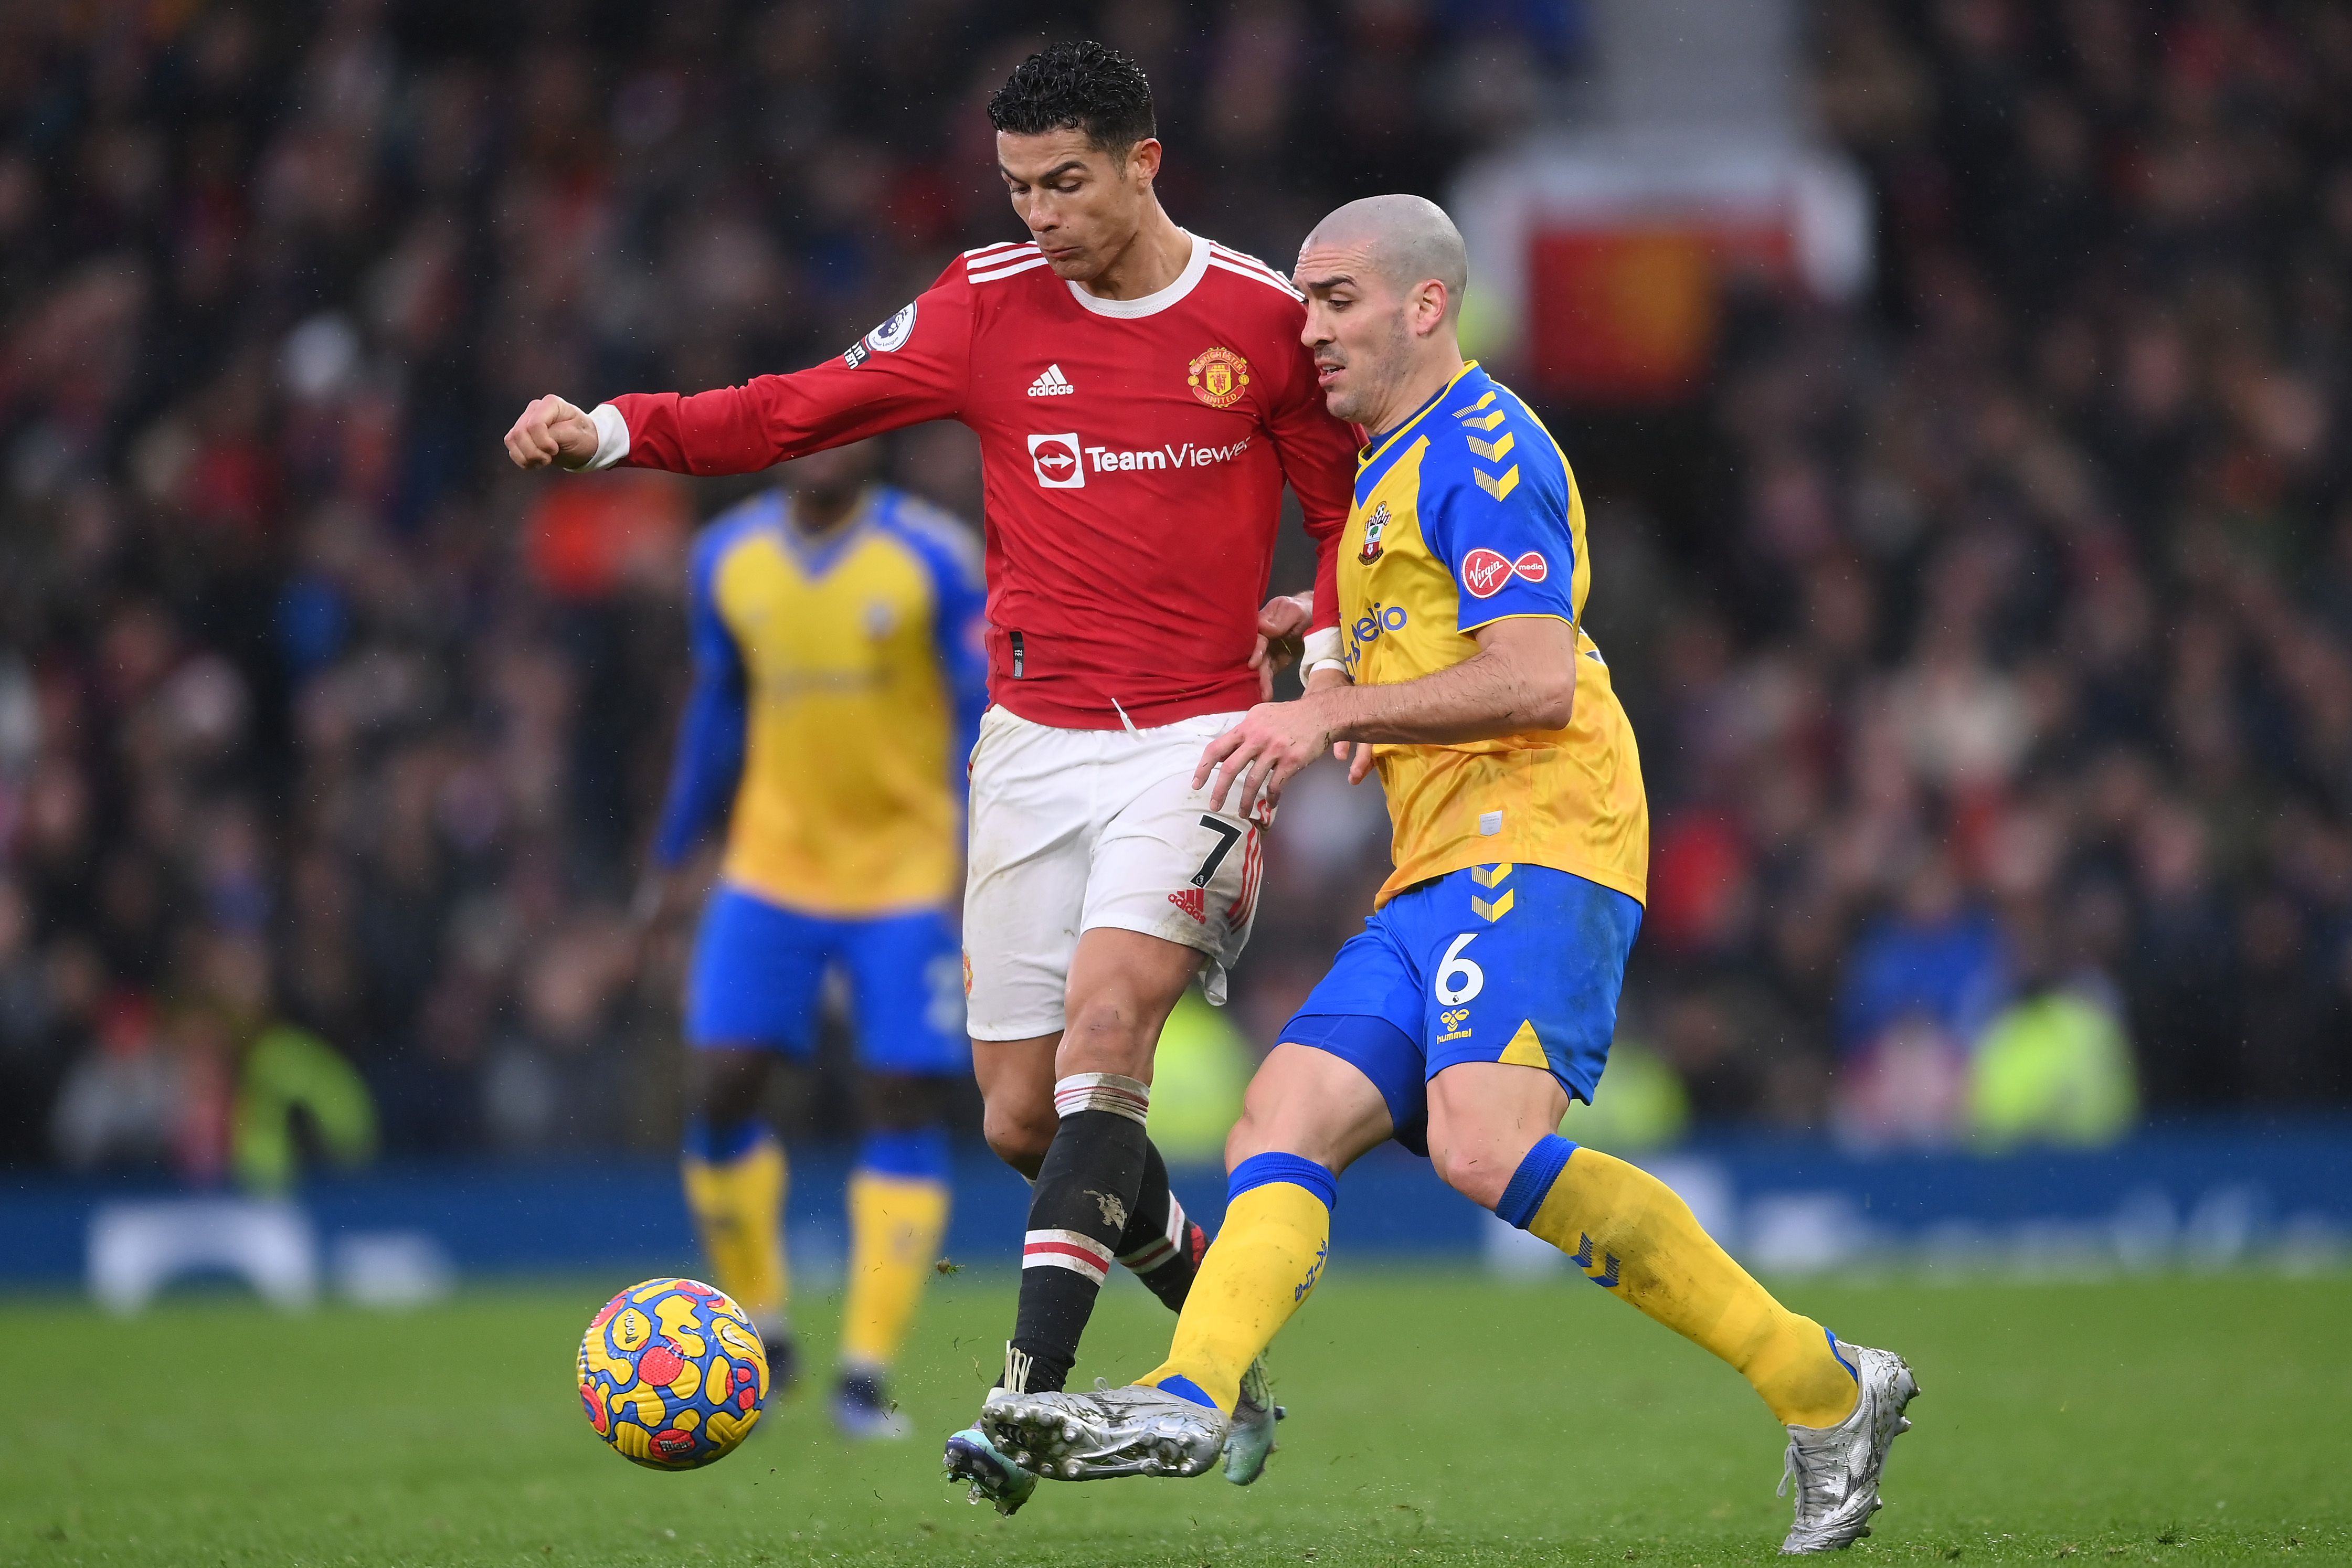 Cristiano Ronaldo of Manchester United is challenged by Oriol Romeu of Southampton